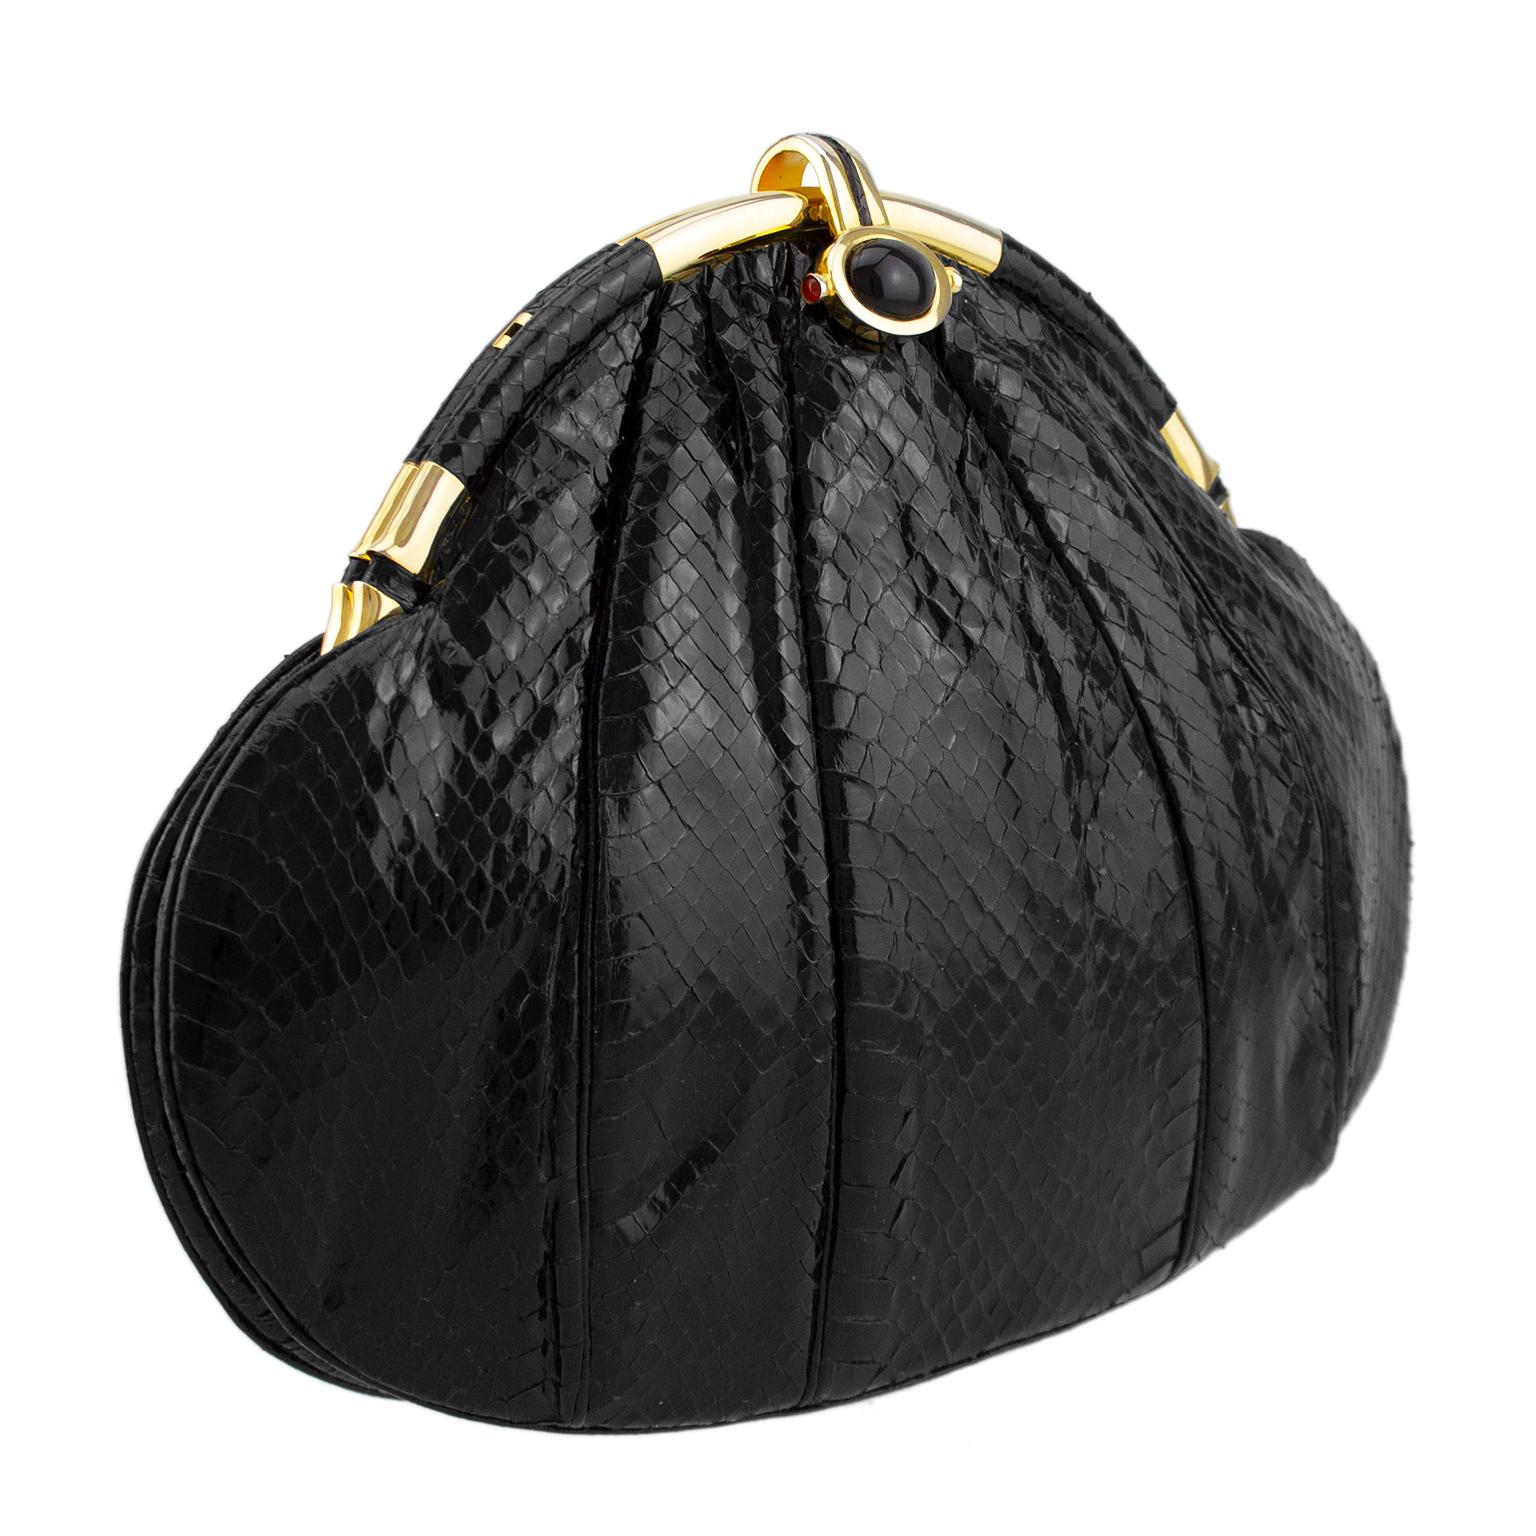 Judith Leiber large art deco style evening clutch from the late 1980s. Black imprinted simulated reptile with gathering and pleats that add texture. Contrasting gold tone metal hardware and a large oval cabochon at closure. Black satin interior with